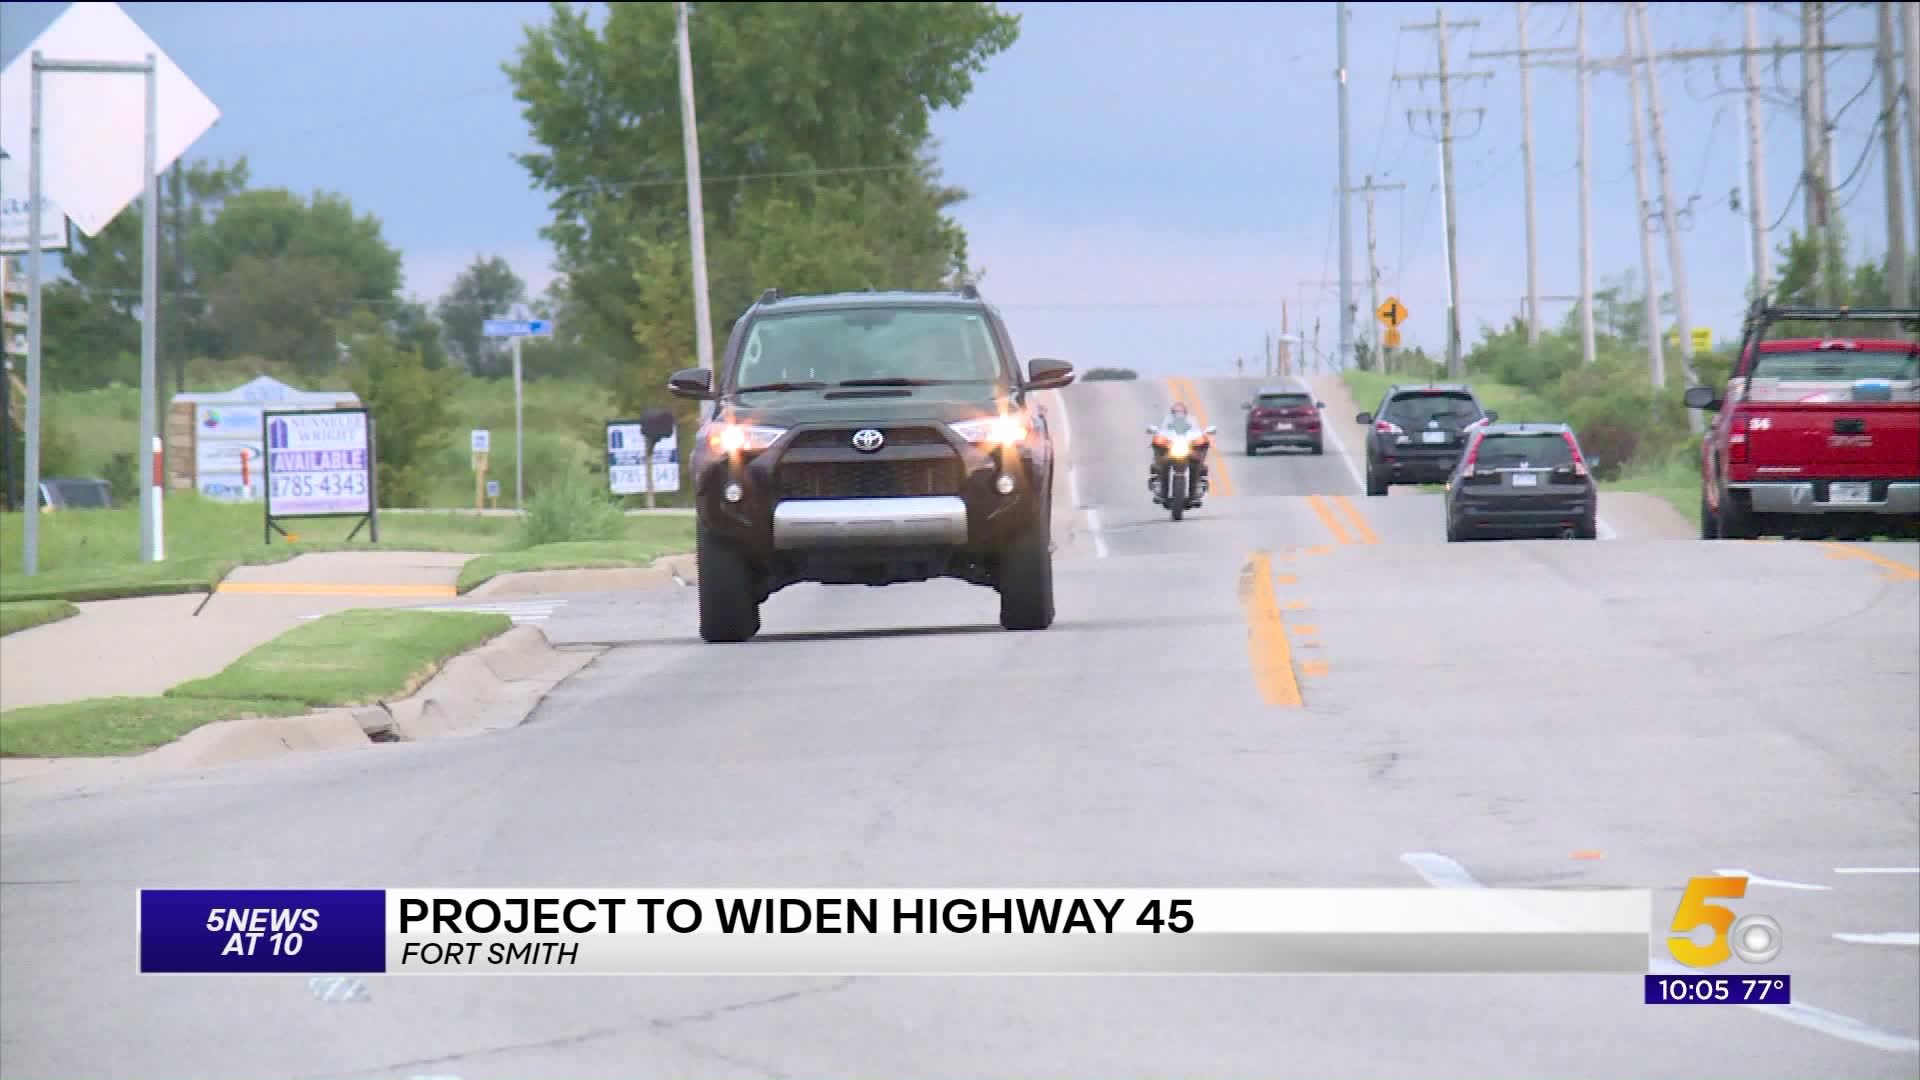 ARDOT Announces New Road Construction Project In The River Valley